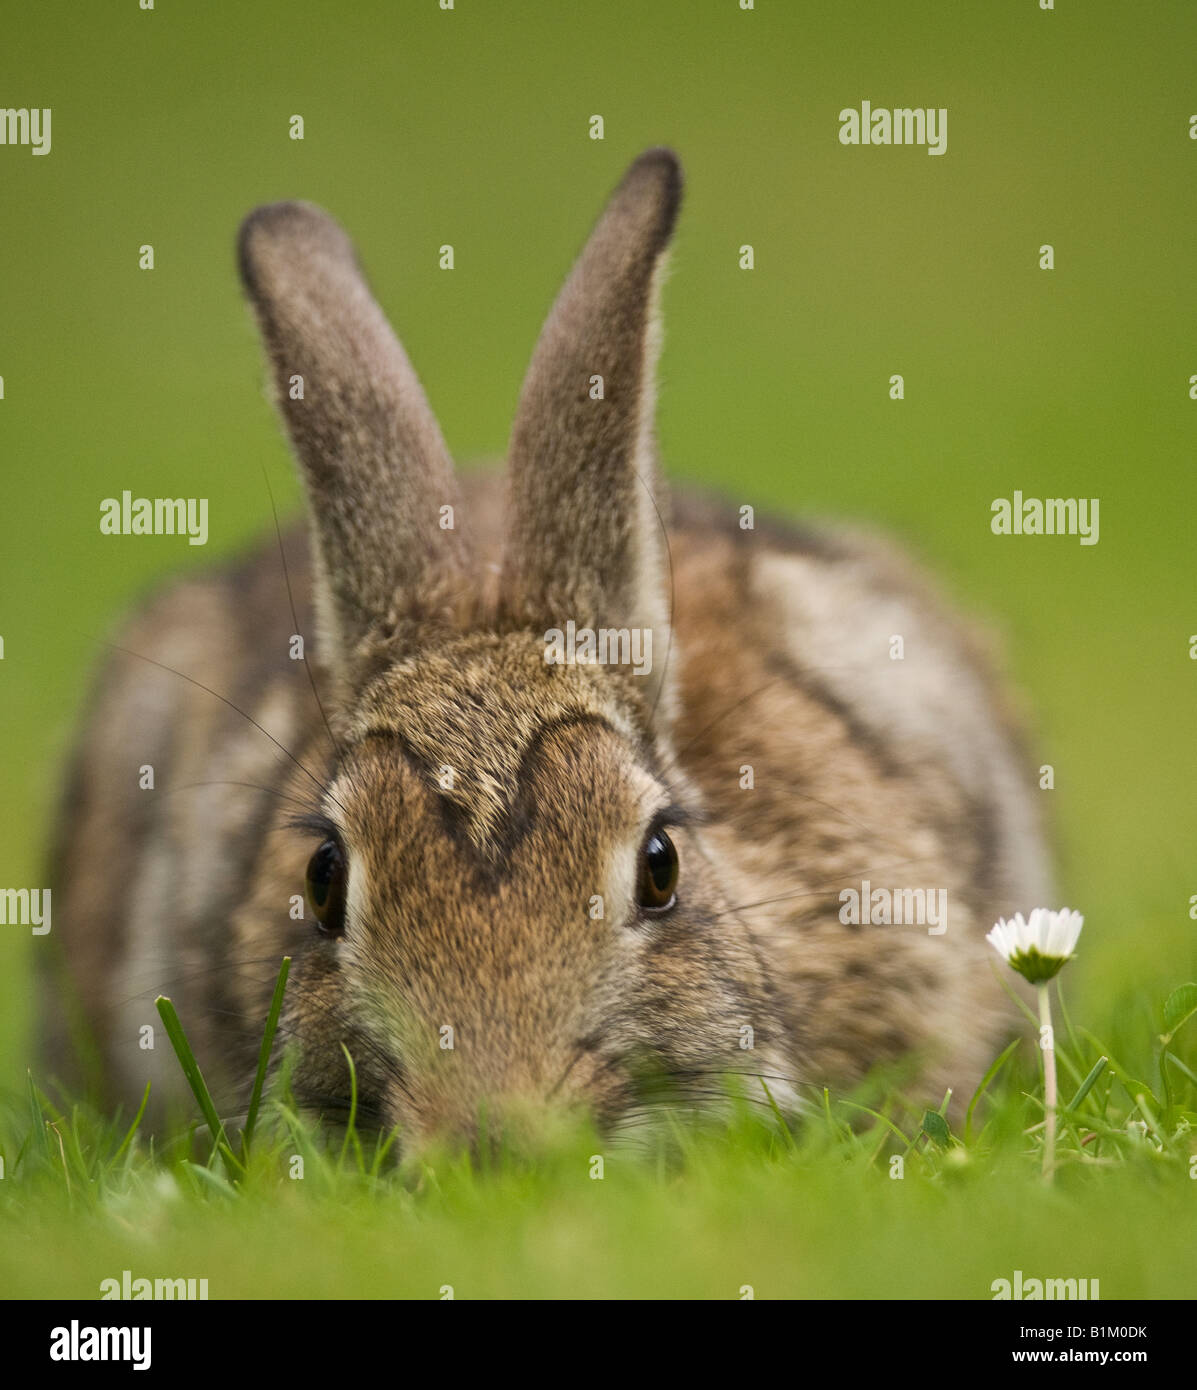 A Brown Rabbit Oryctolagus cuniculus next to a daisy flower Stock Photo